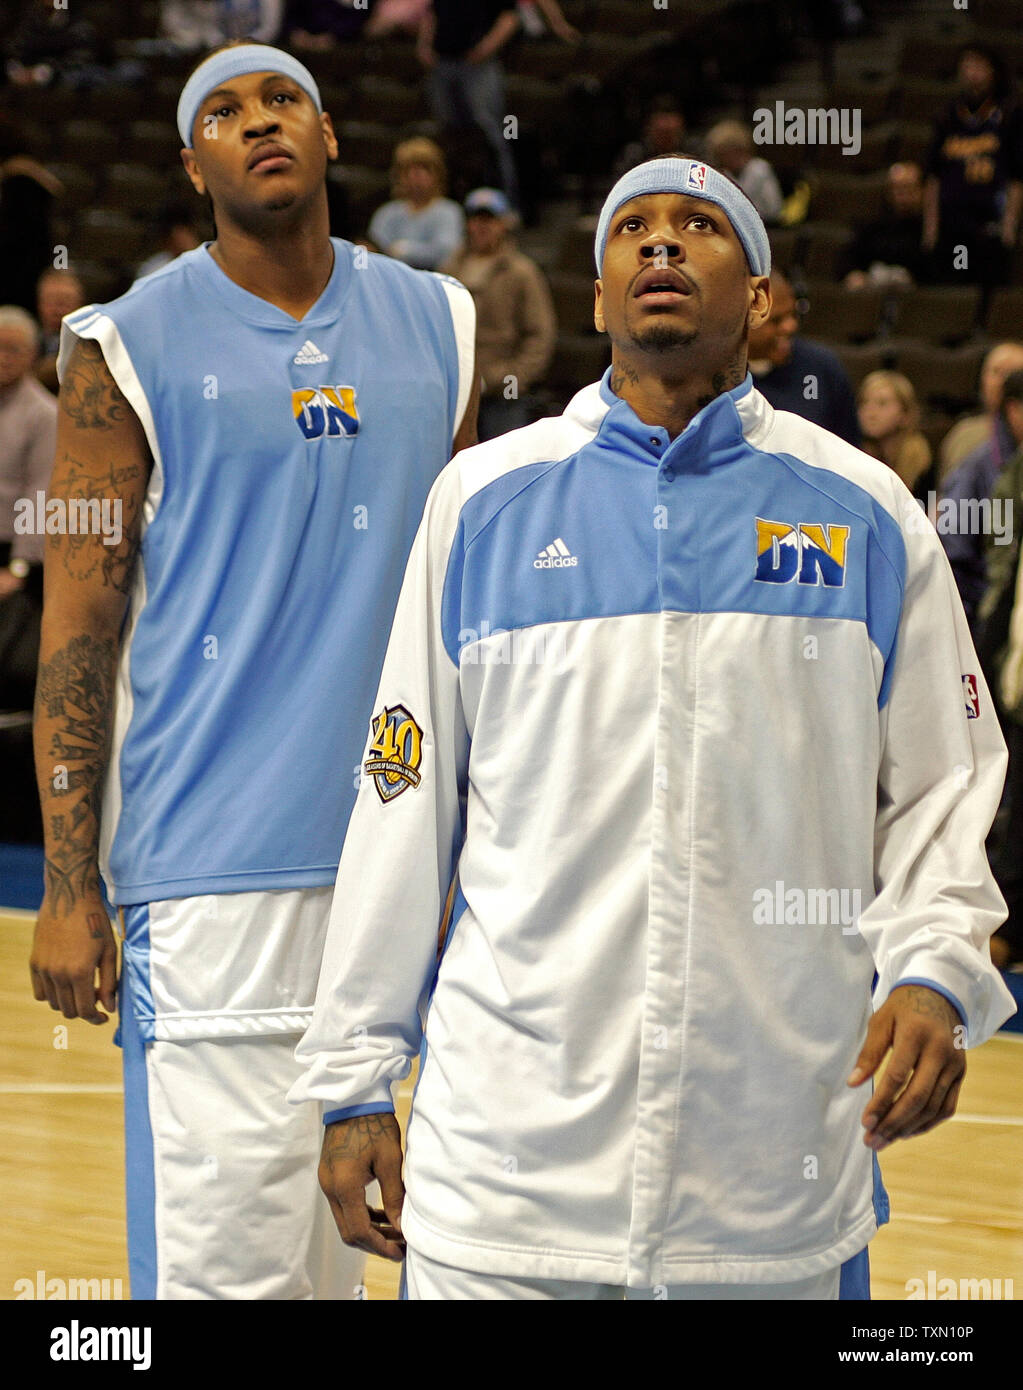 Denver Nuggets Carmelo Anthony (R) and Allen Iverson (L) sit on the bench  late in the fourth quarter as the Nuggets held a lead over the Memphis  Grizzlies at the Pepsi Center